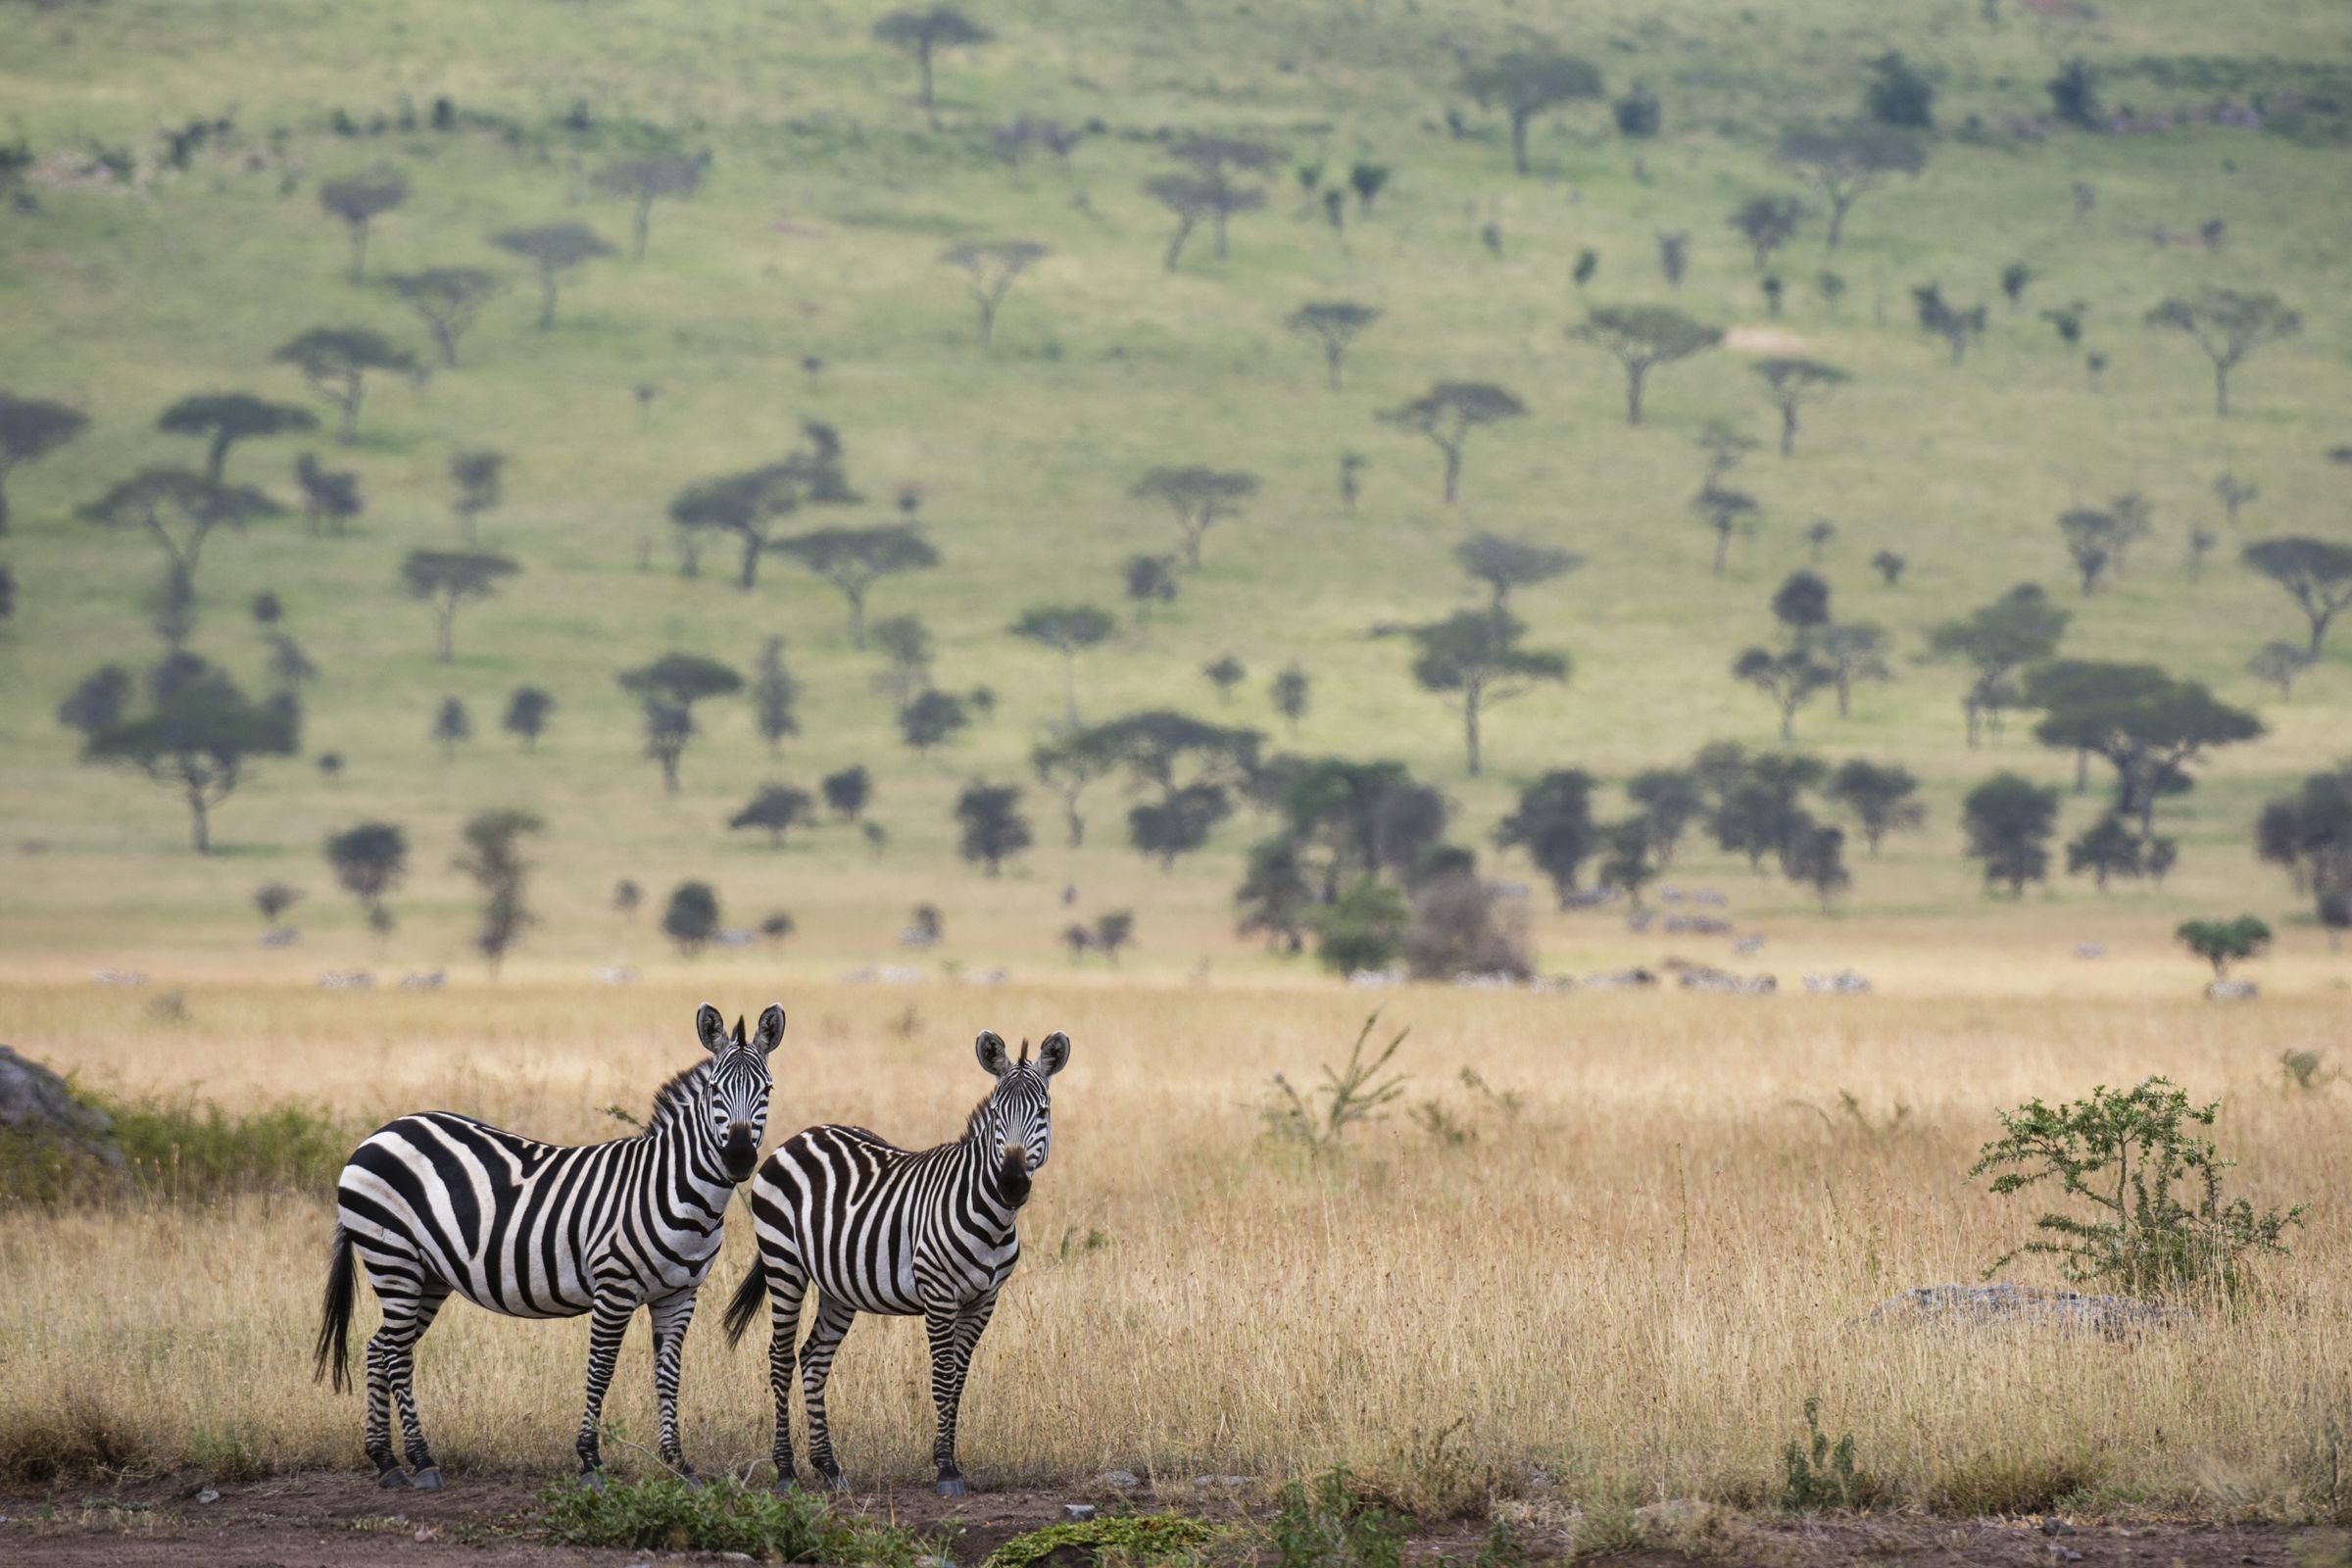 Two zebras stand in the foreground. In the background, trees dot a grassy landscape.